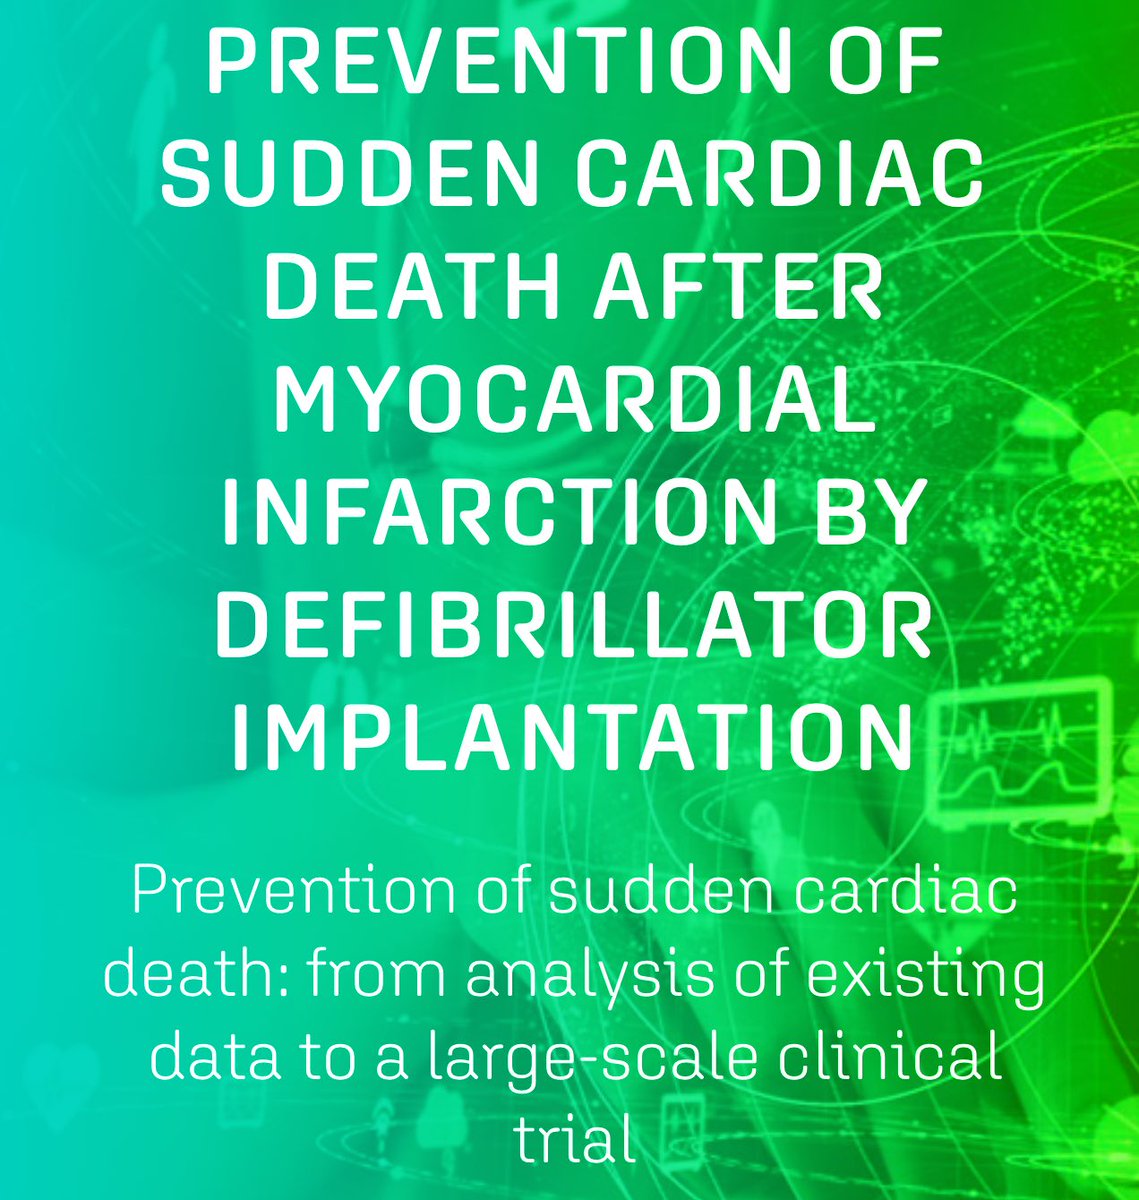 ✅ Do reach out to us if you would like your hospital to be a research site for the @PROFID_EU randomised clinical trial testing the effectiveness of primary prevention ICD in #heartfailure with severe LVSD after #heartattack ✅ Email: info@profid-project.eu